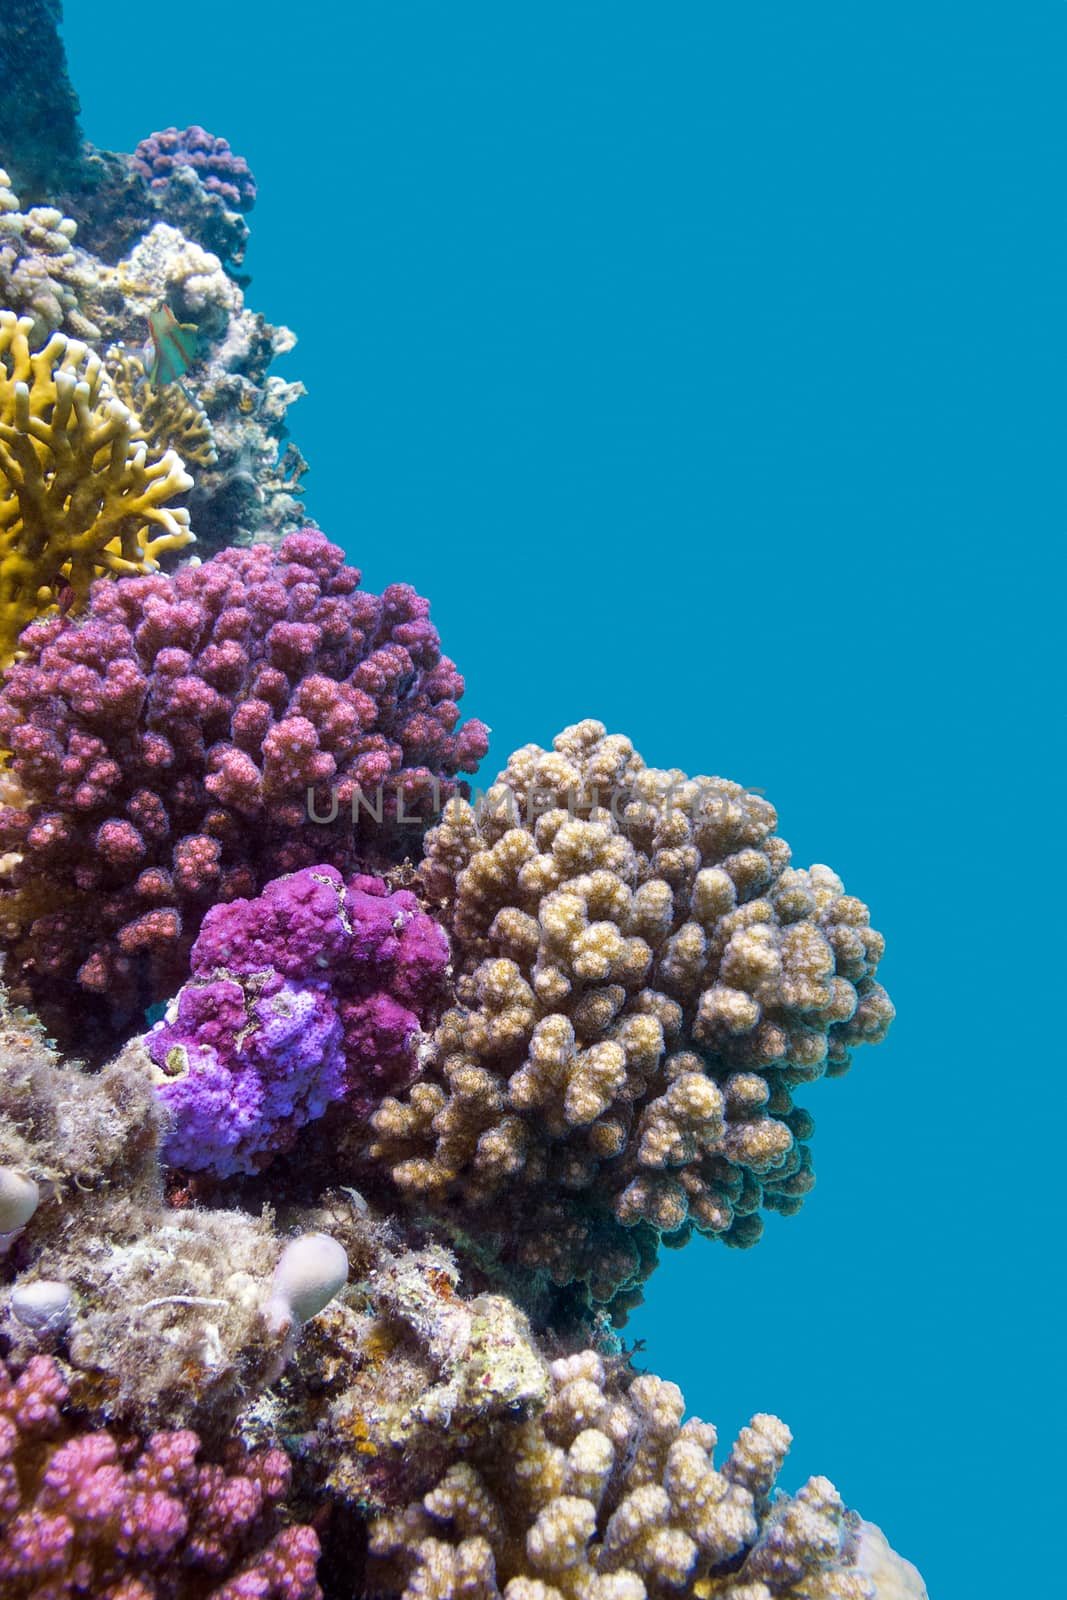 coral reef with violet hard corals poccillopora at the bottom of tropical sea on blue water background